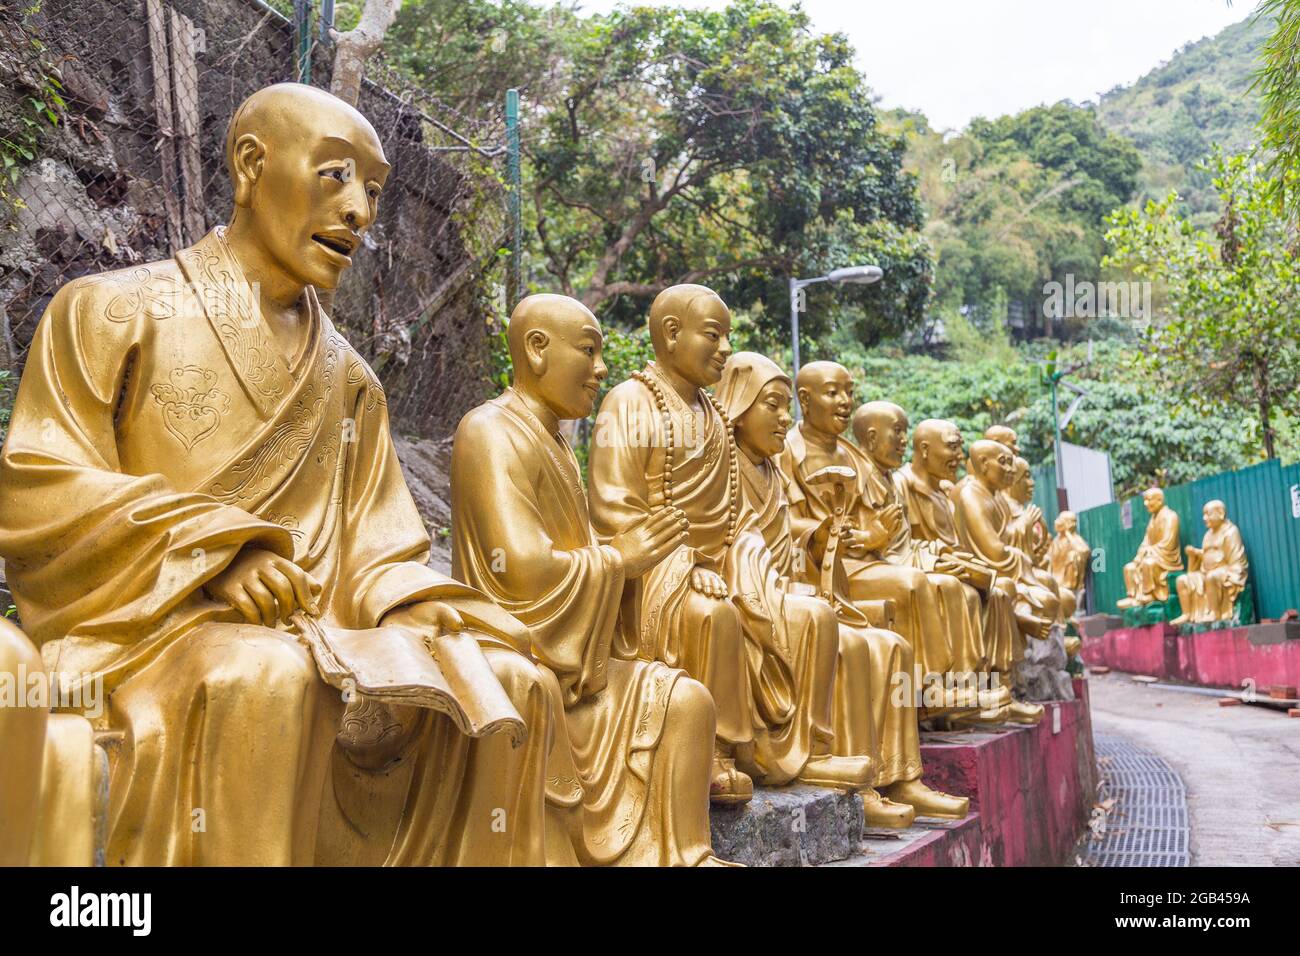 HONG KONG - 10TH APRIL, 2017: Closeup to rows of Buddhas on the path leading up to Ten Thousand Buddhas Monastery, located in Sha Tin, Hong Kong Stock Photo